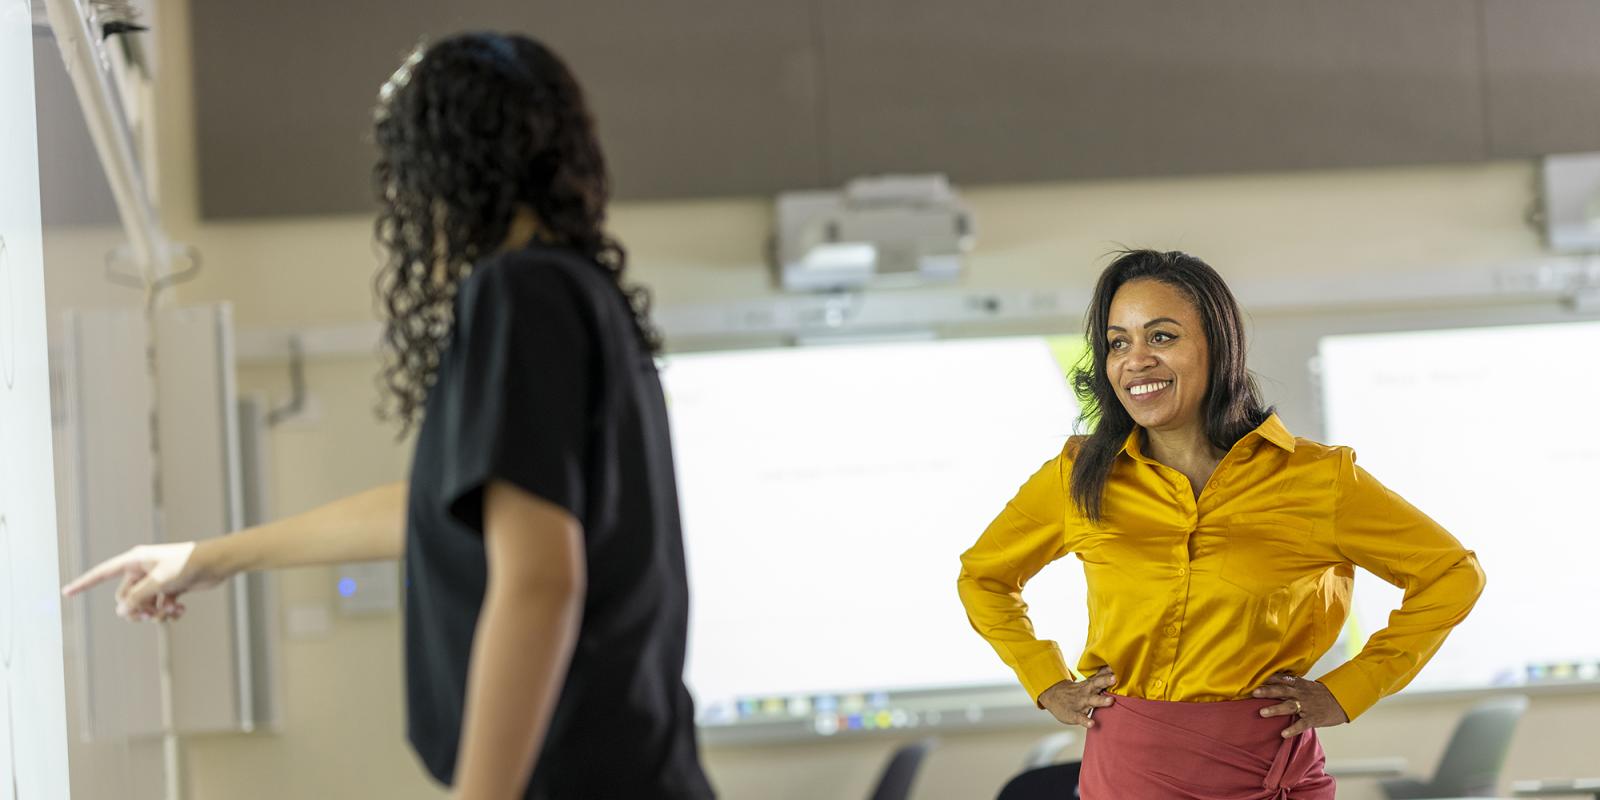 Woman in a yellow shirt works with a student in front of a whiteboard